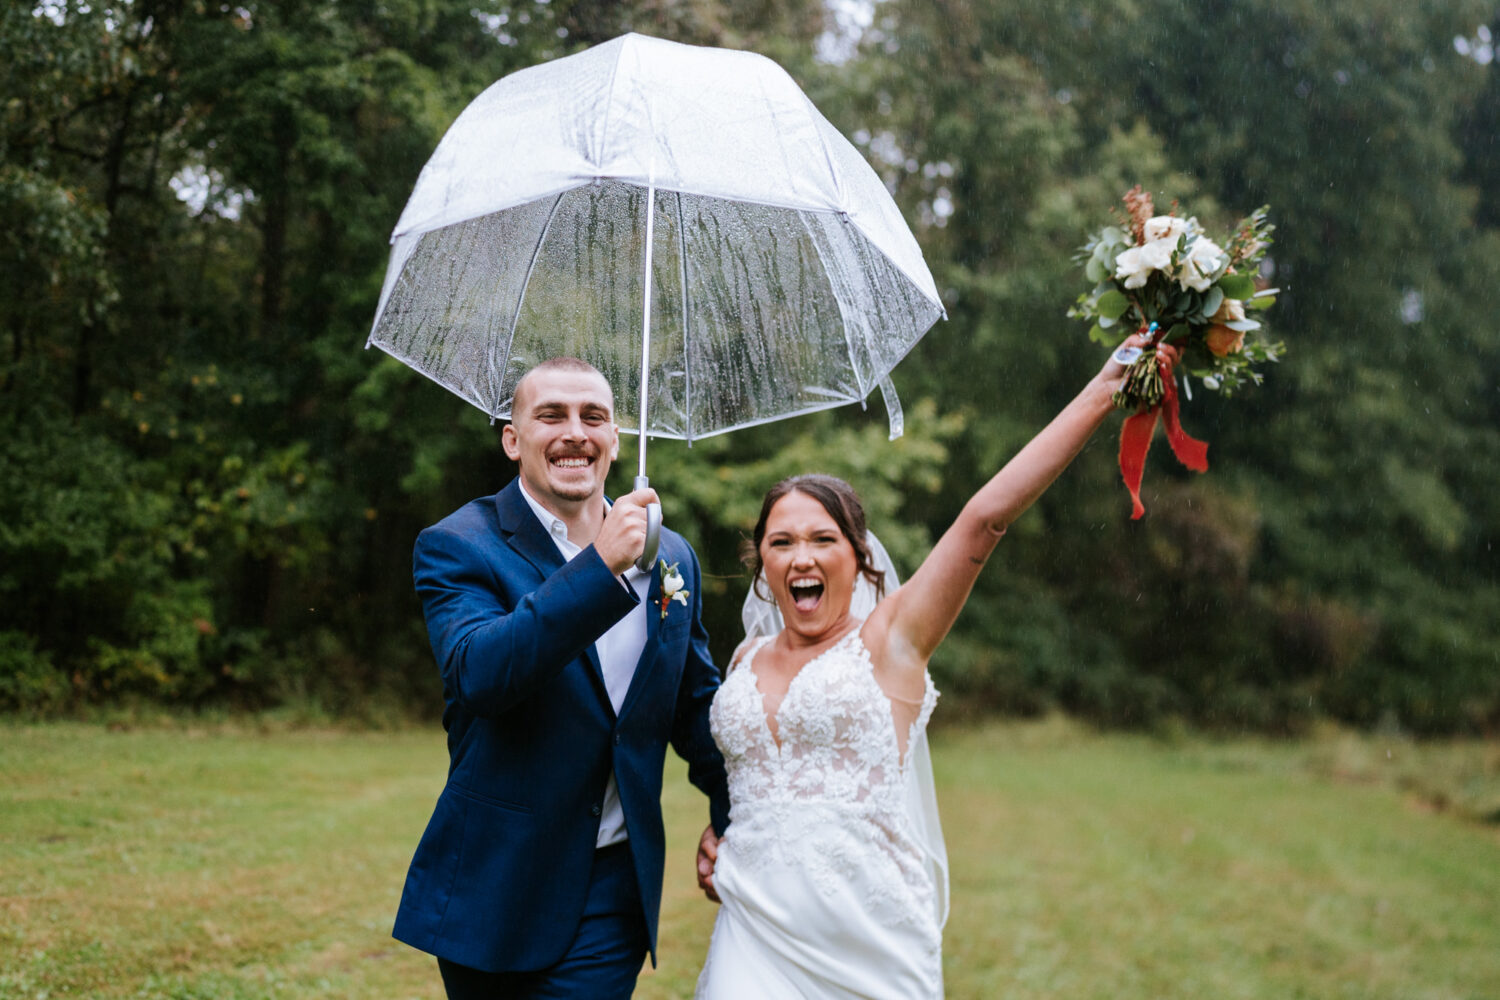 bride and groom running in the rain together on their wedding day